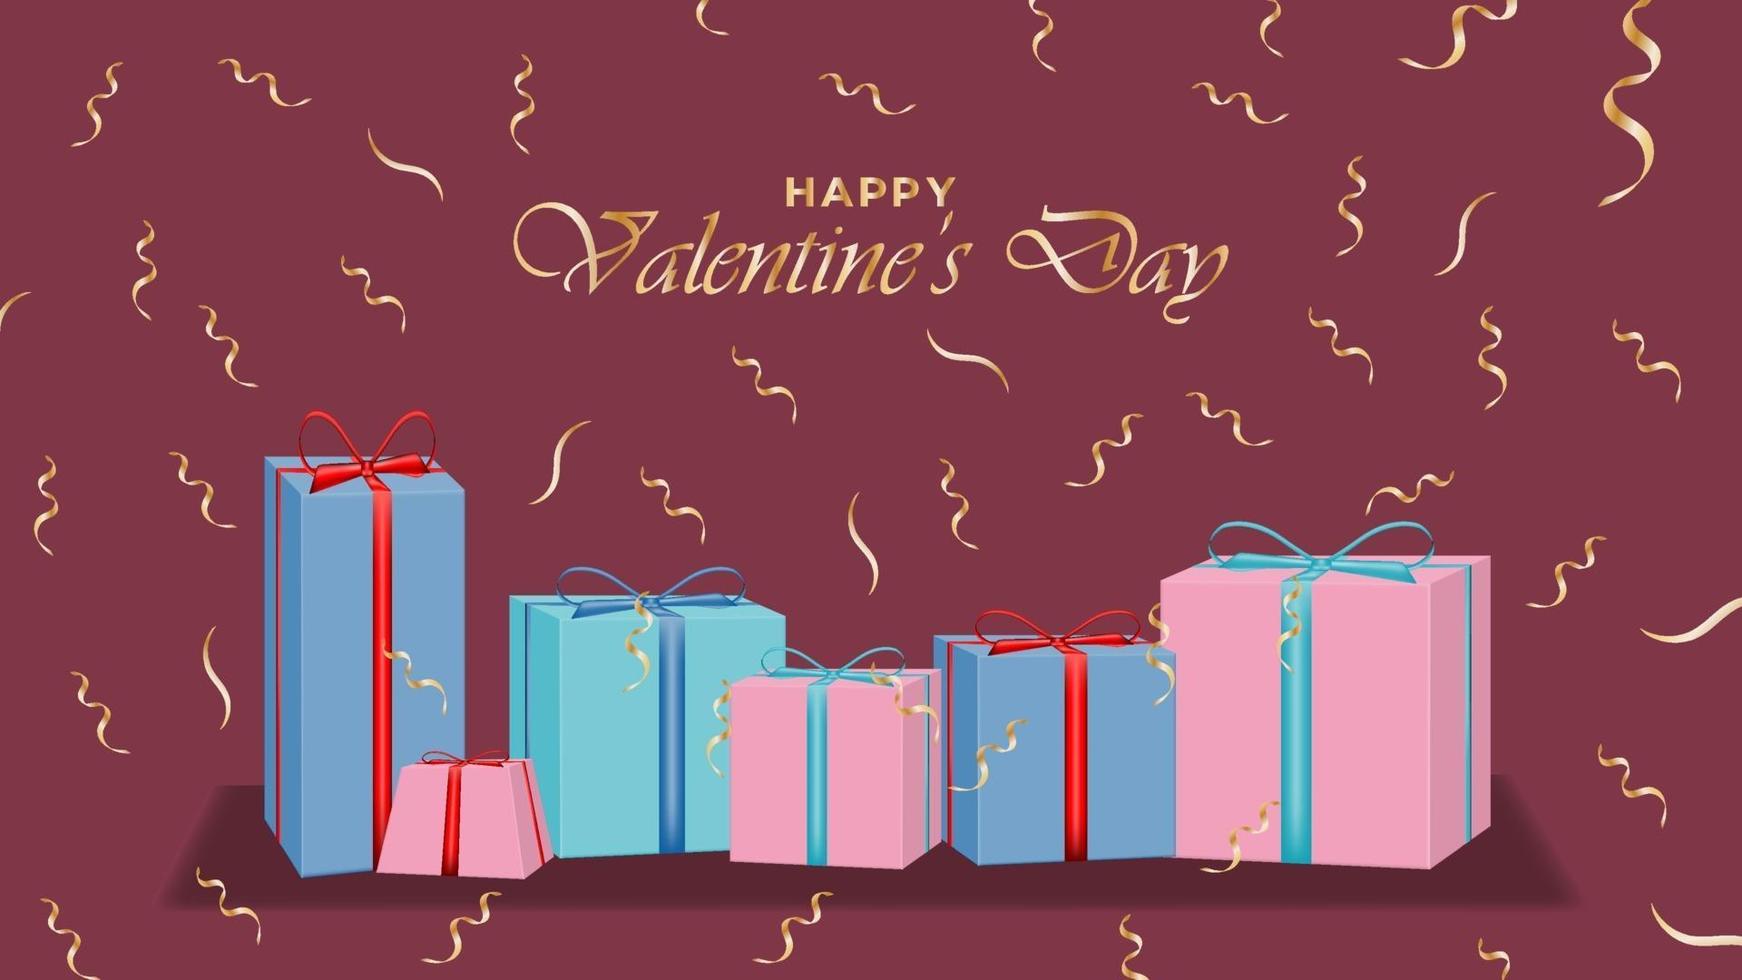 Happy valentine day background with realistic gift box design objects vector